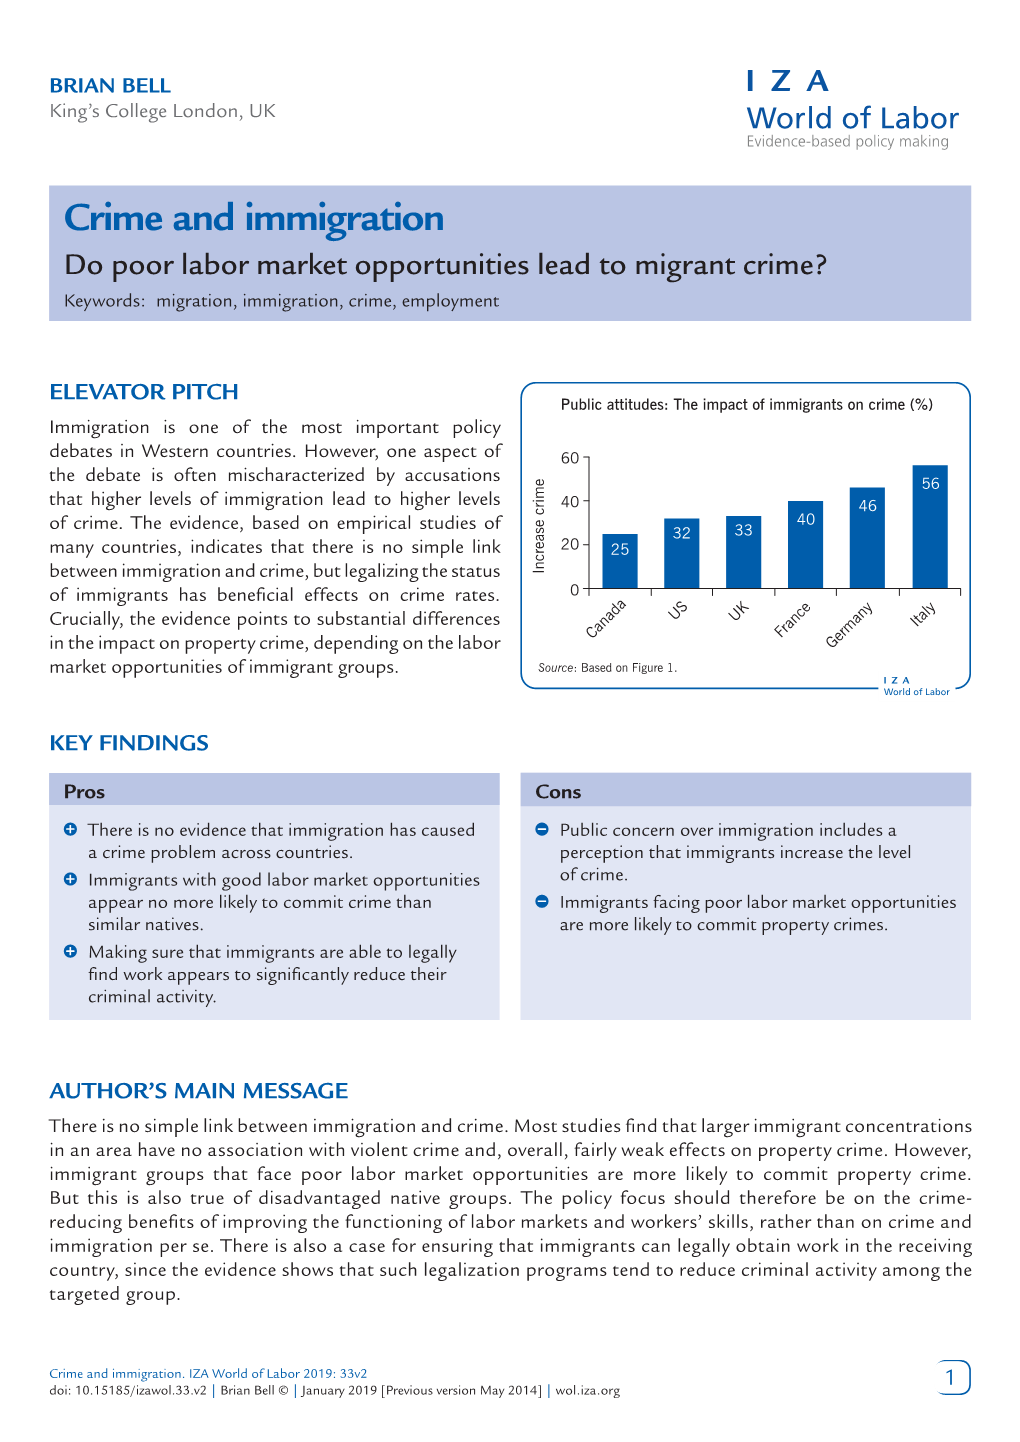 Crime and Immigration Do Poor Labor Market Opportunities Lead to Migrant Crime? Keywords: Migration, Immigration, Crime, Employment